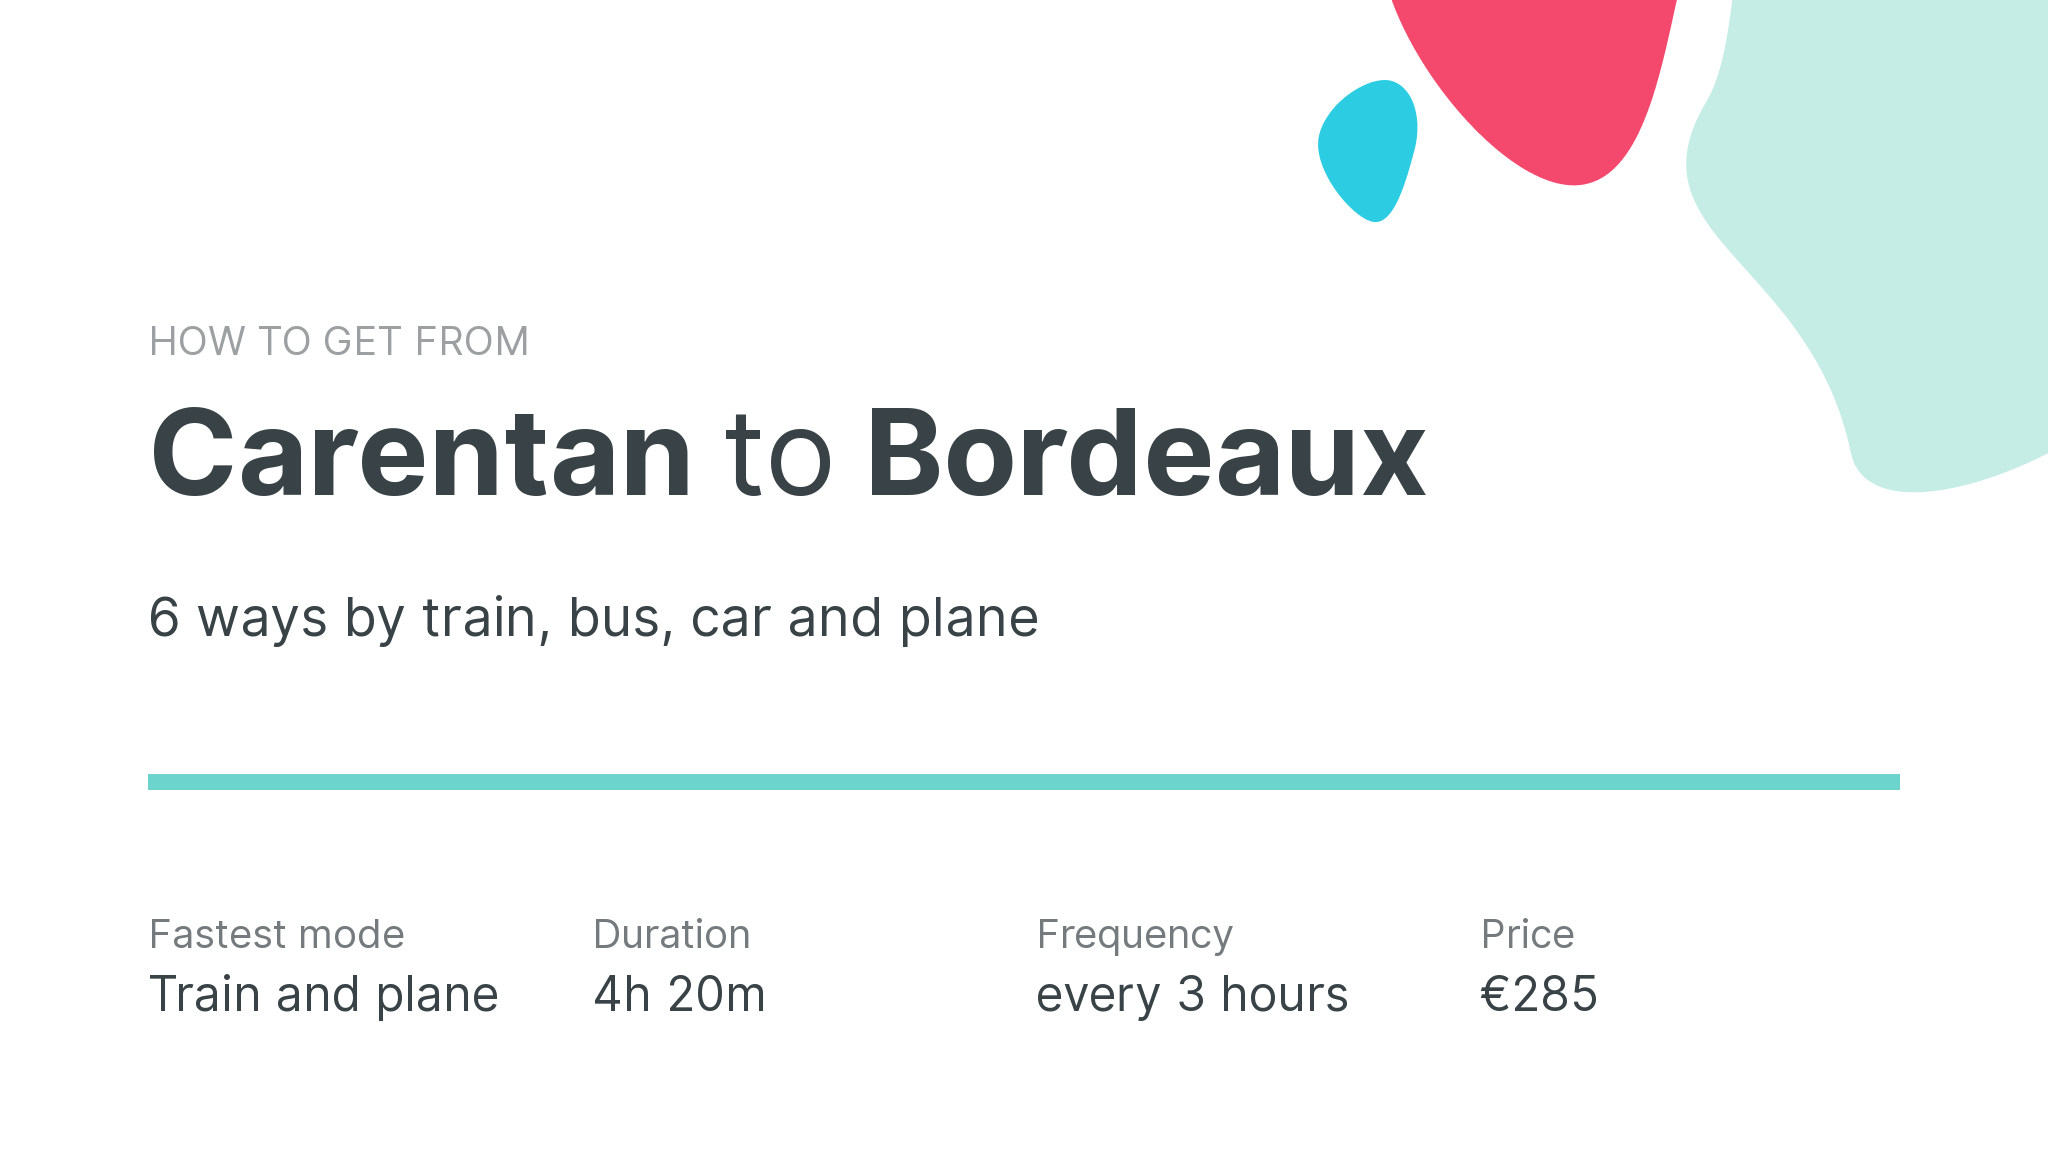 How do I get from Carentan to Bordeaux